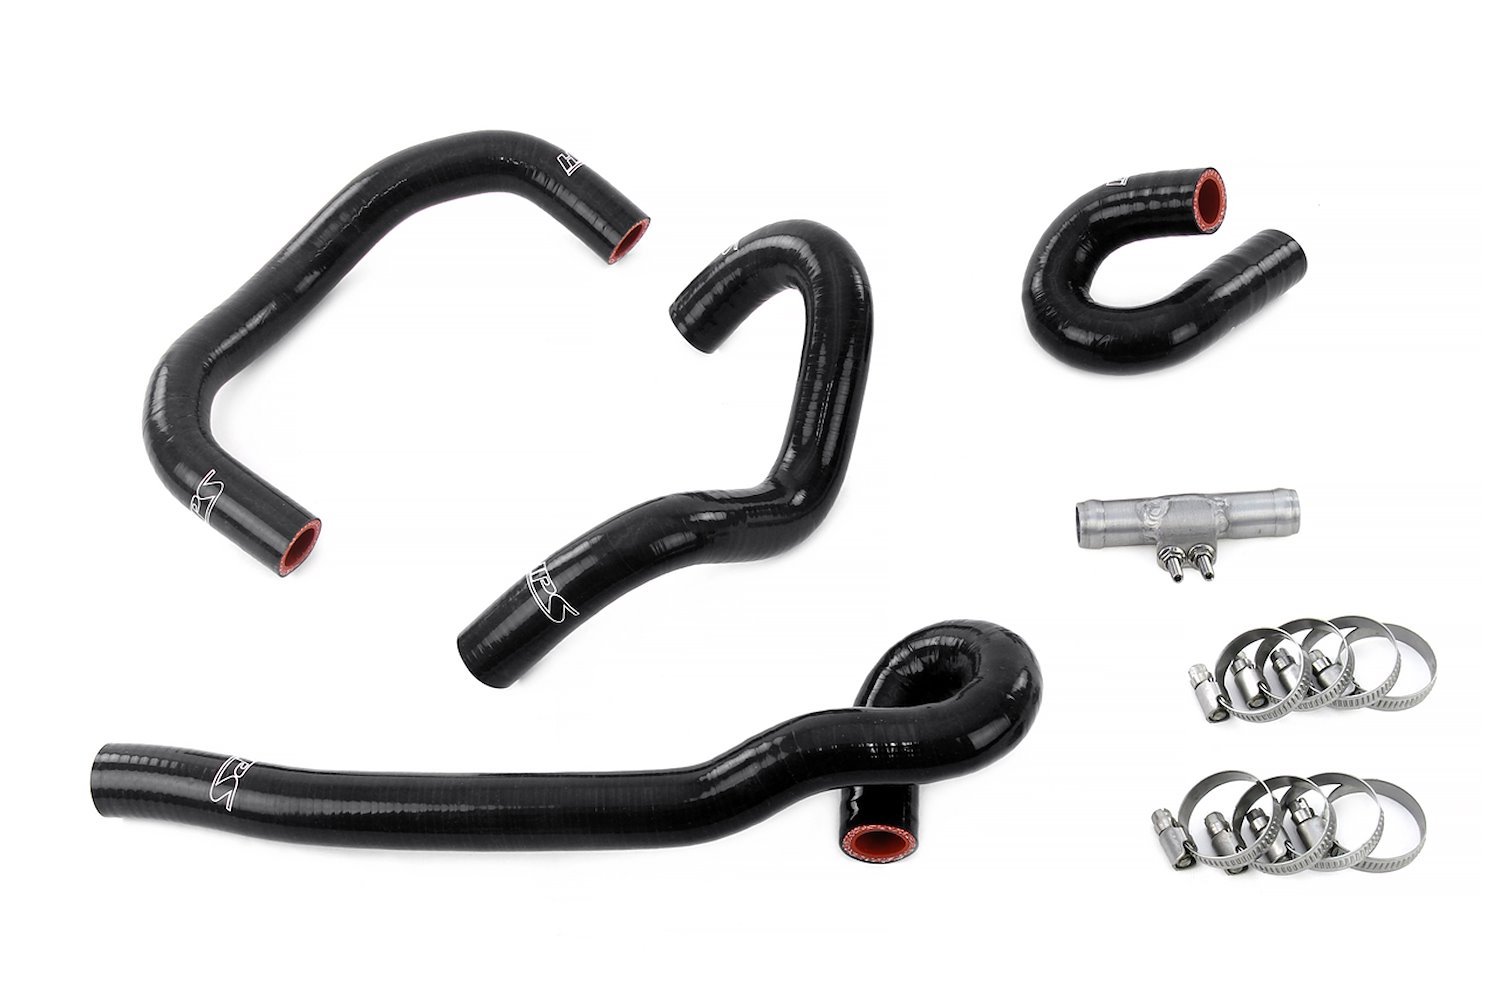 57-2093-BLK Heater Hose Kit, 3-Ply Reinforced Silicone, Replaces Rubber Heater Hoses